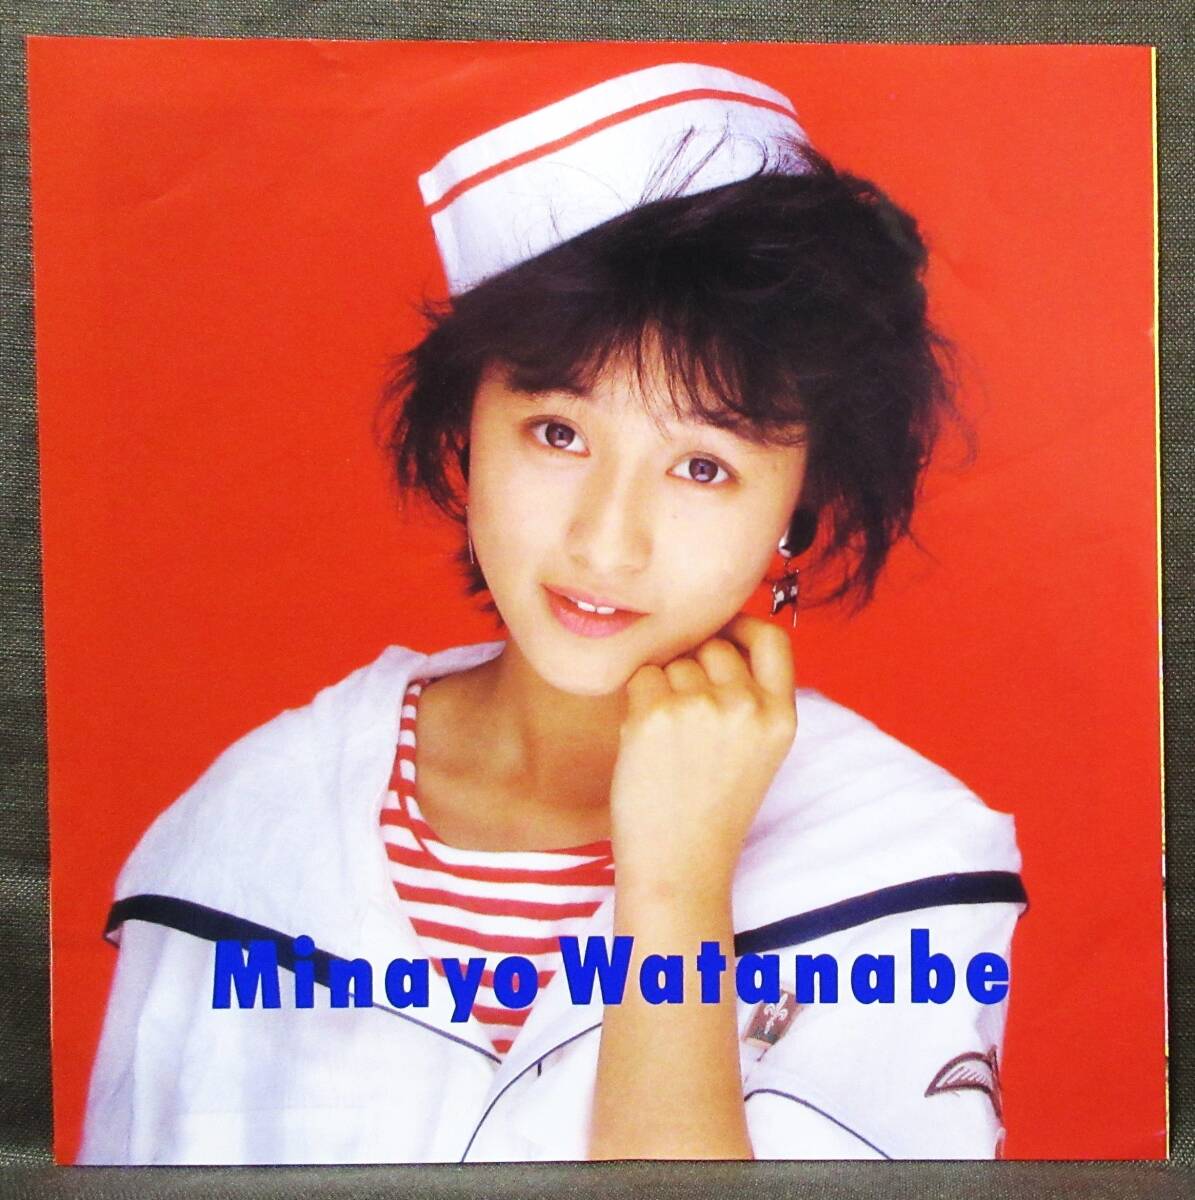 7\'\'EP rare! with autograph Watanabe Minayo [.. promise ] little ...../ member number No.29 entering / Akimoto Yasushi / after wistaria next profit /1986 year /CBS Sony /07SH 1791